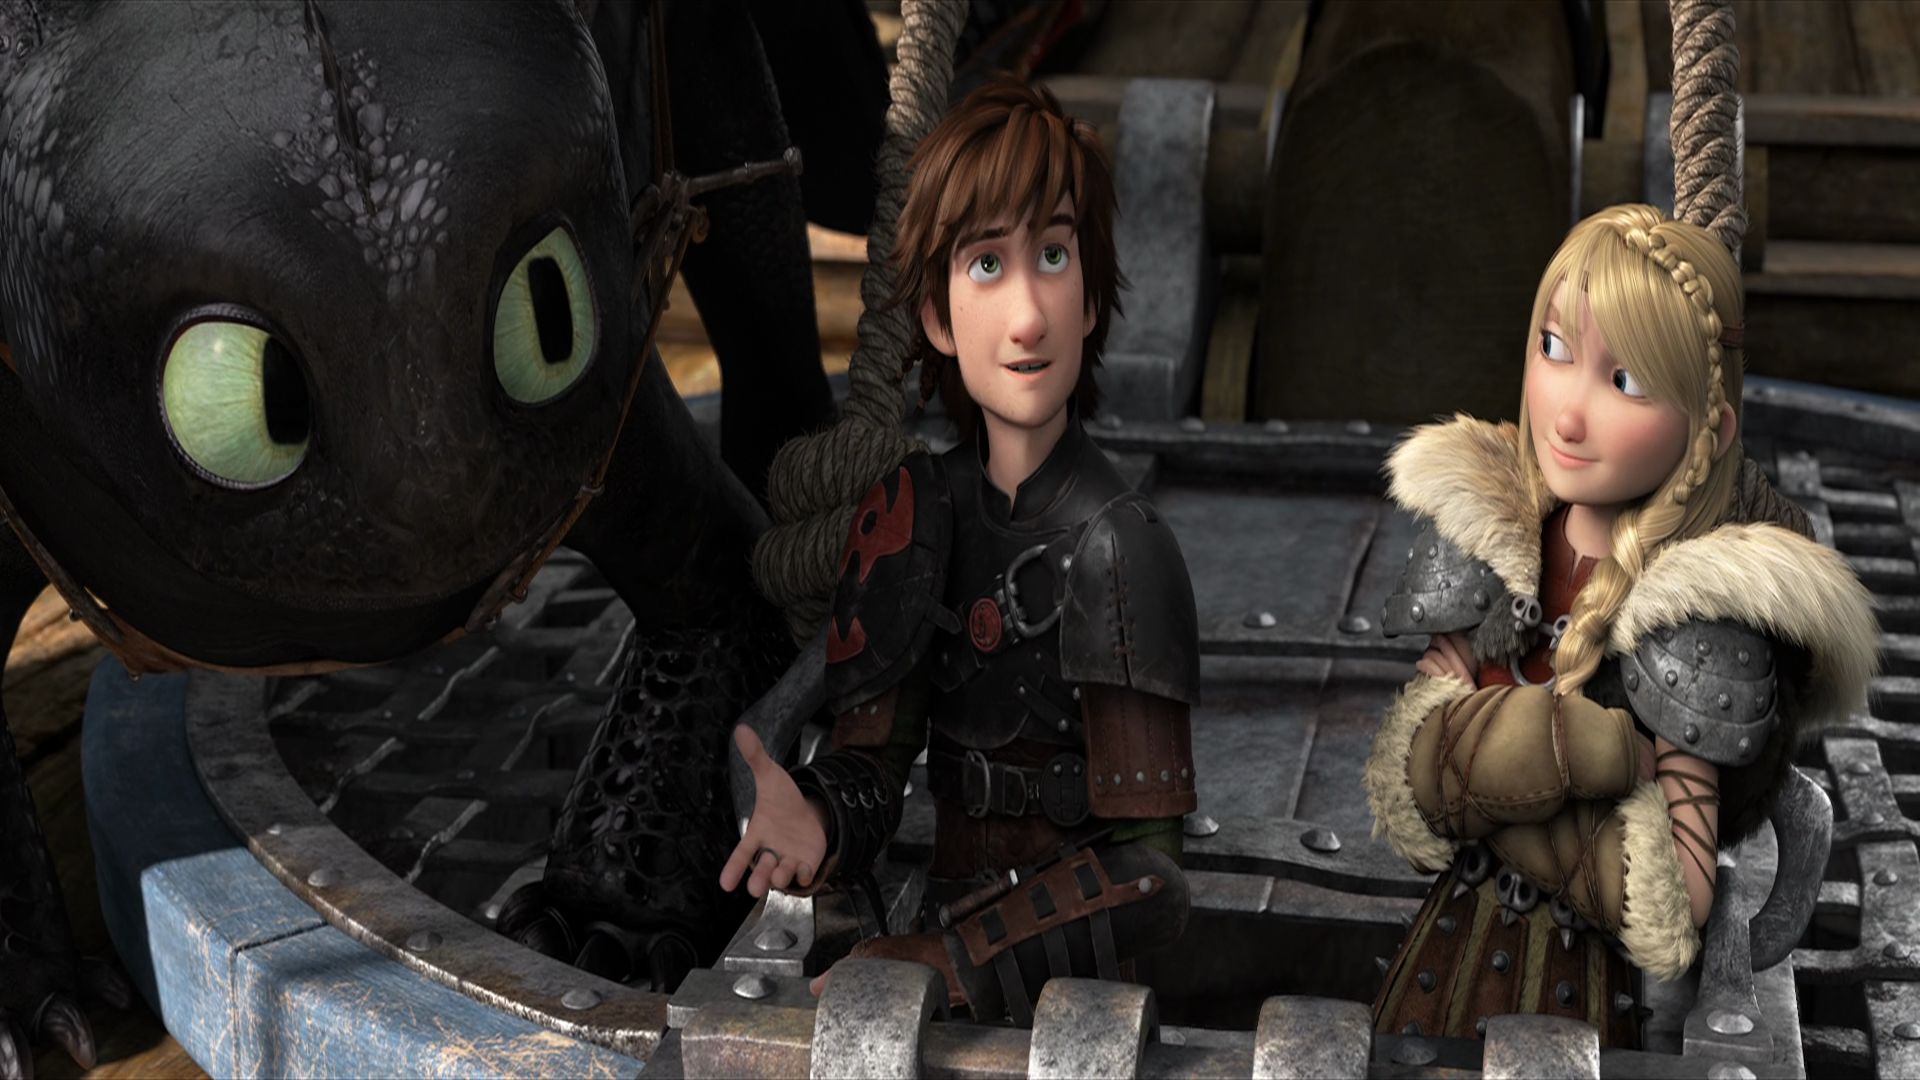 movie, how to train your dragon 2, astrid (how to train your dragon), hiccup (how to train your dragon), toothless (how to train your dragon), how to train your dragon